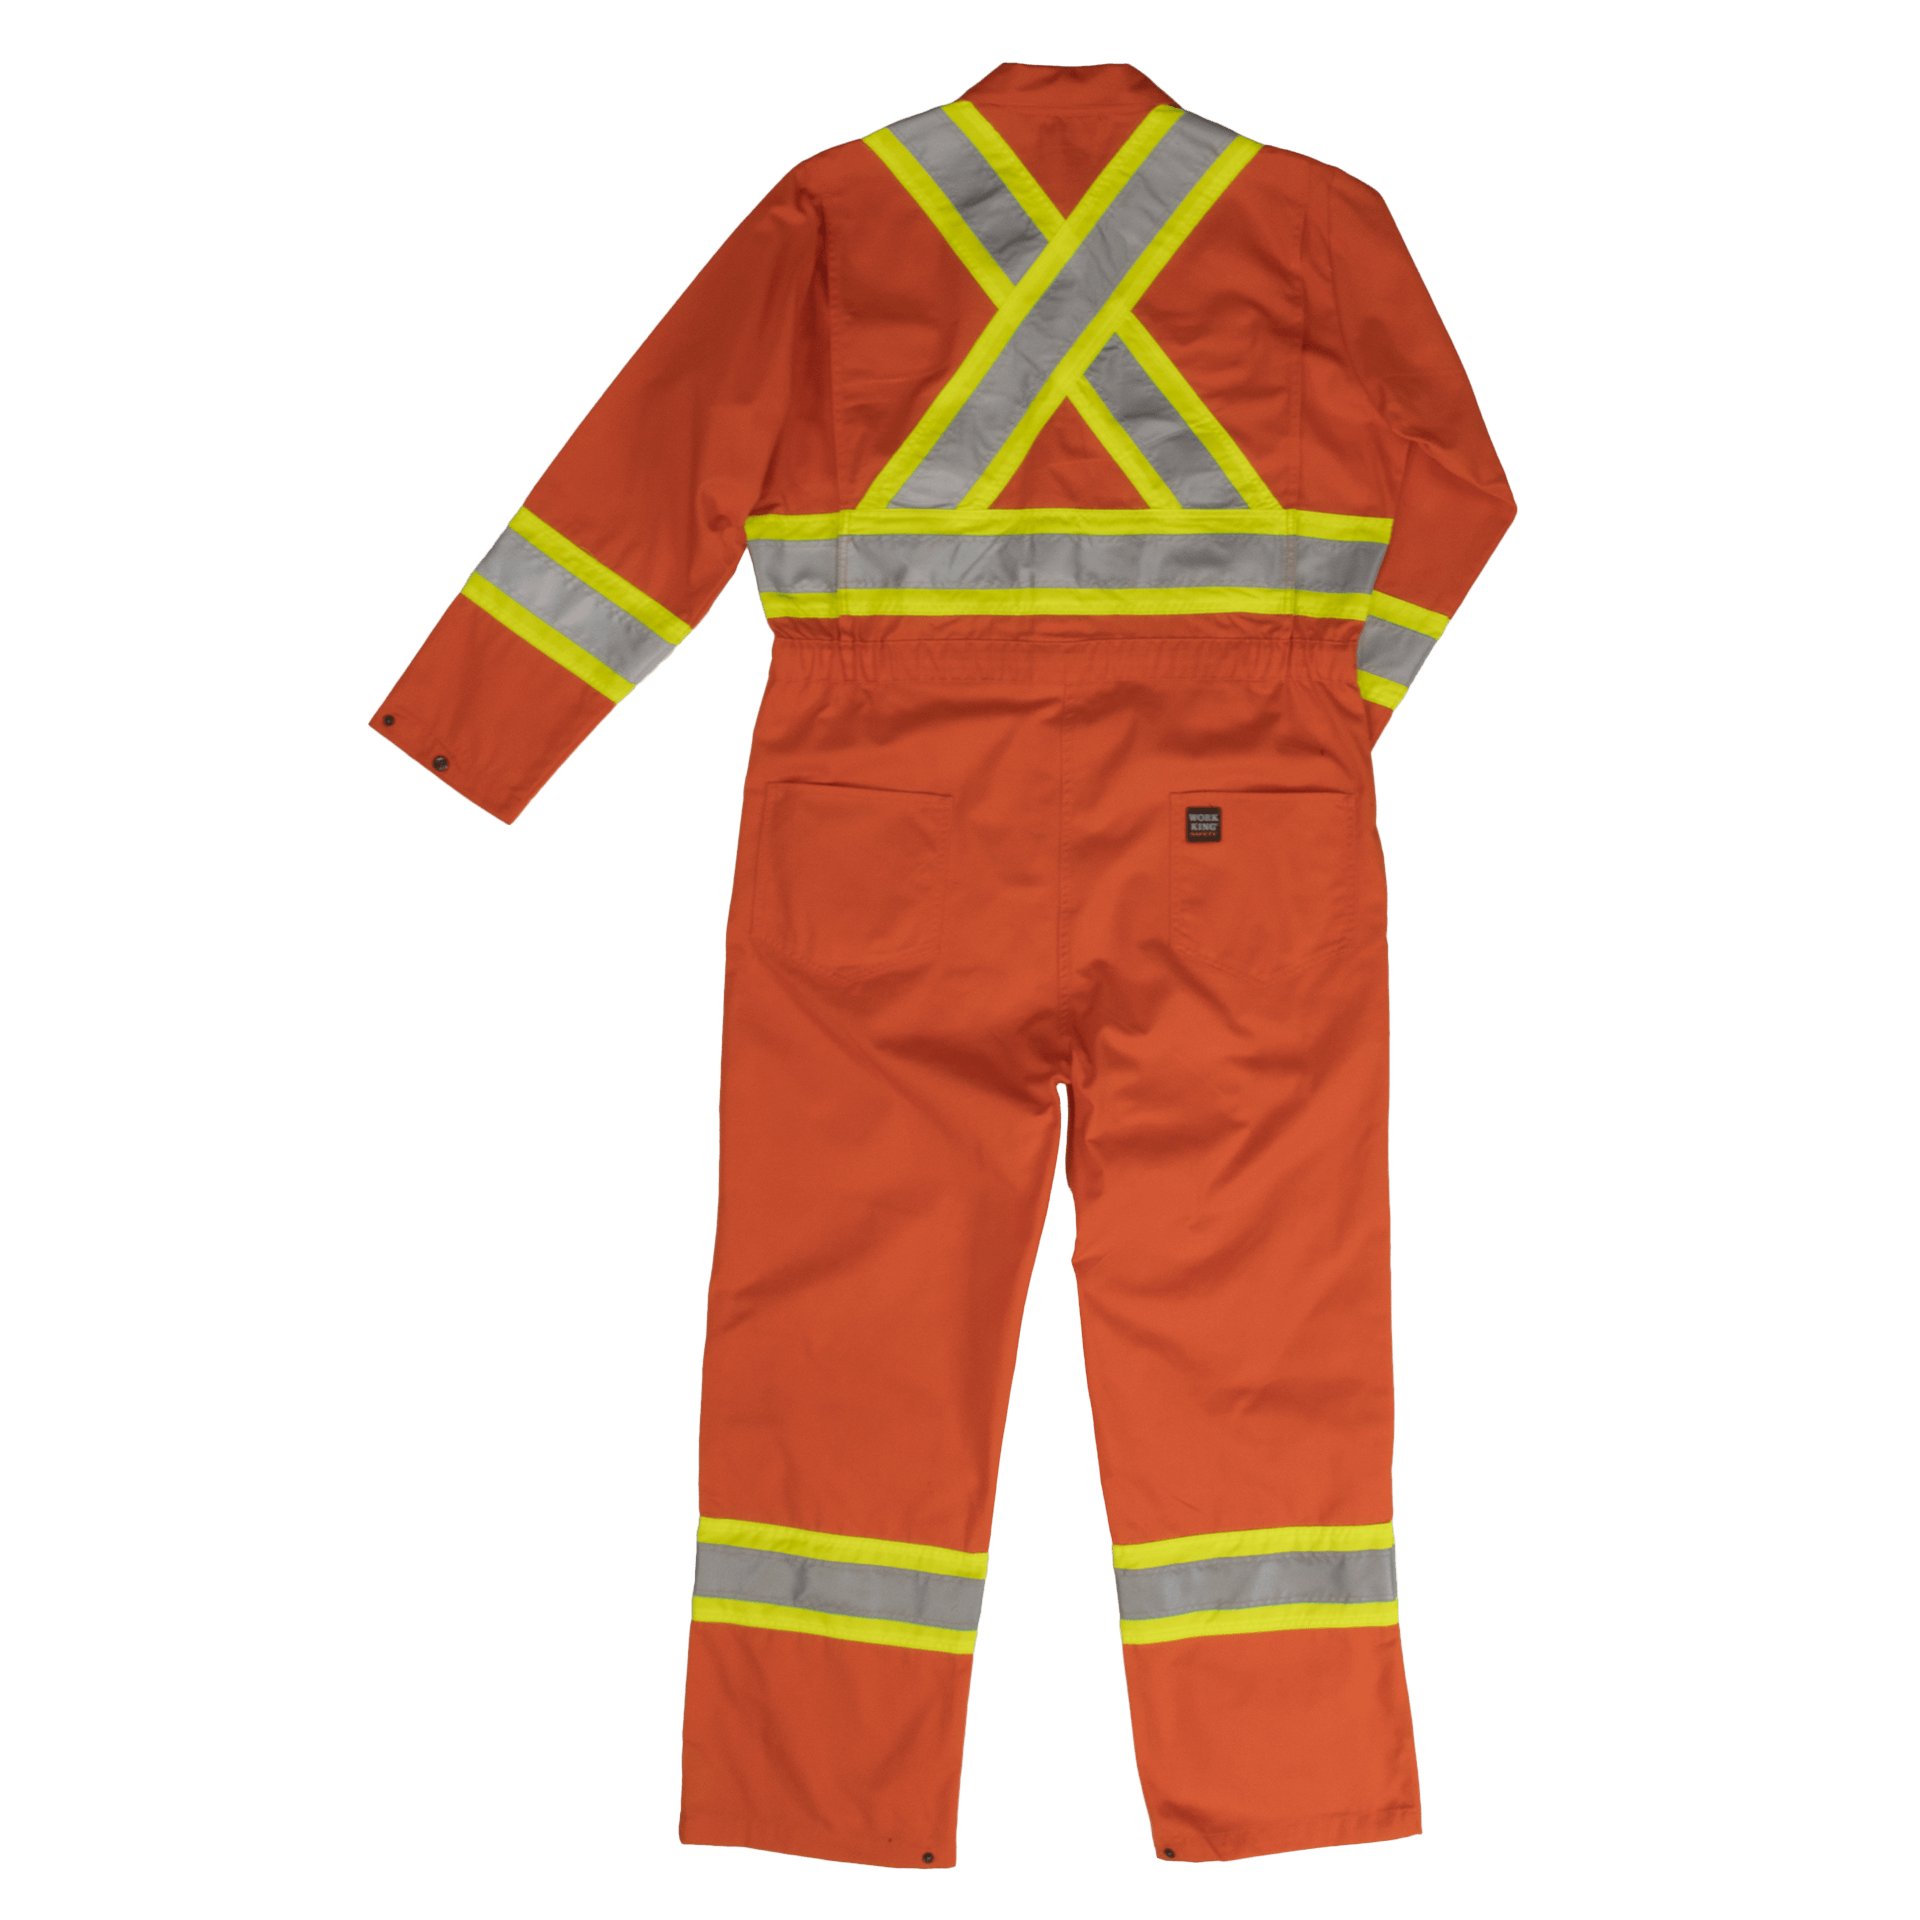 Tough Duck Unlined Safety Coverall - S792 - Orange - back